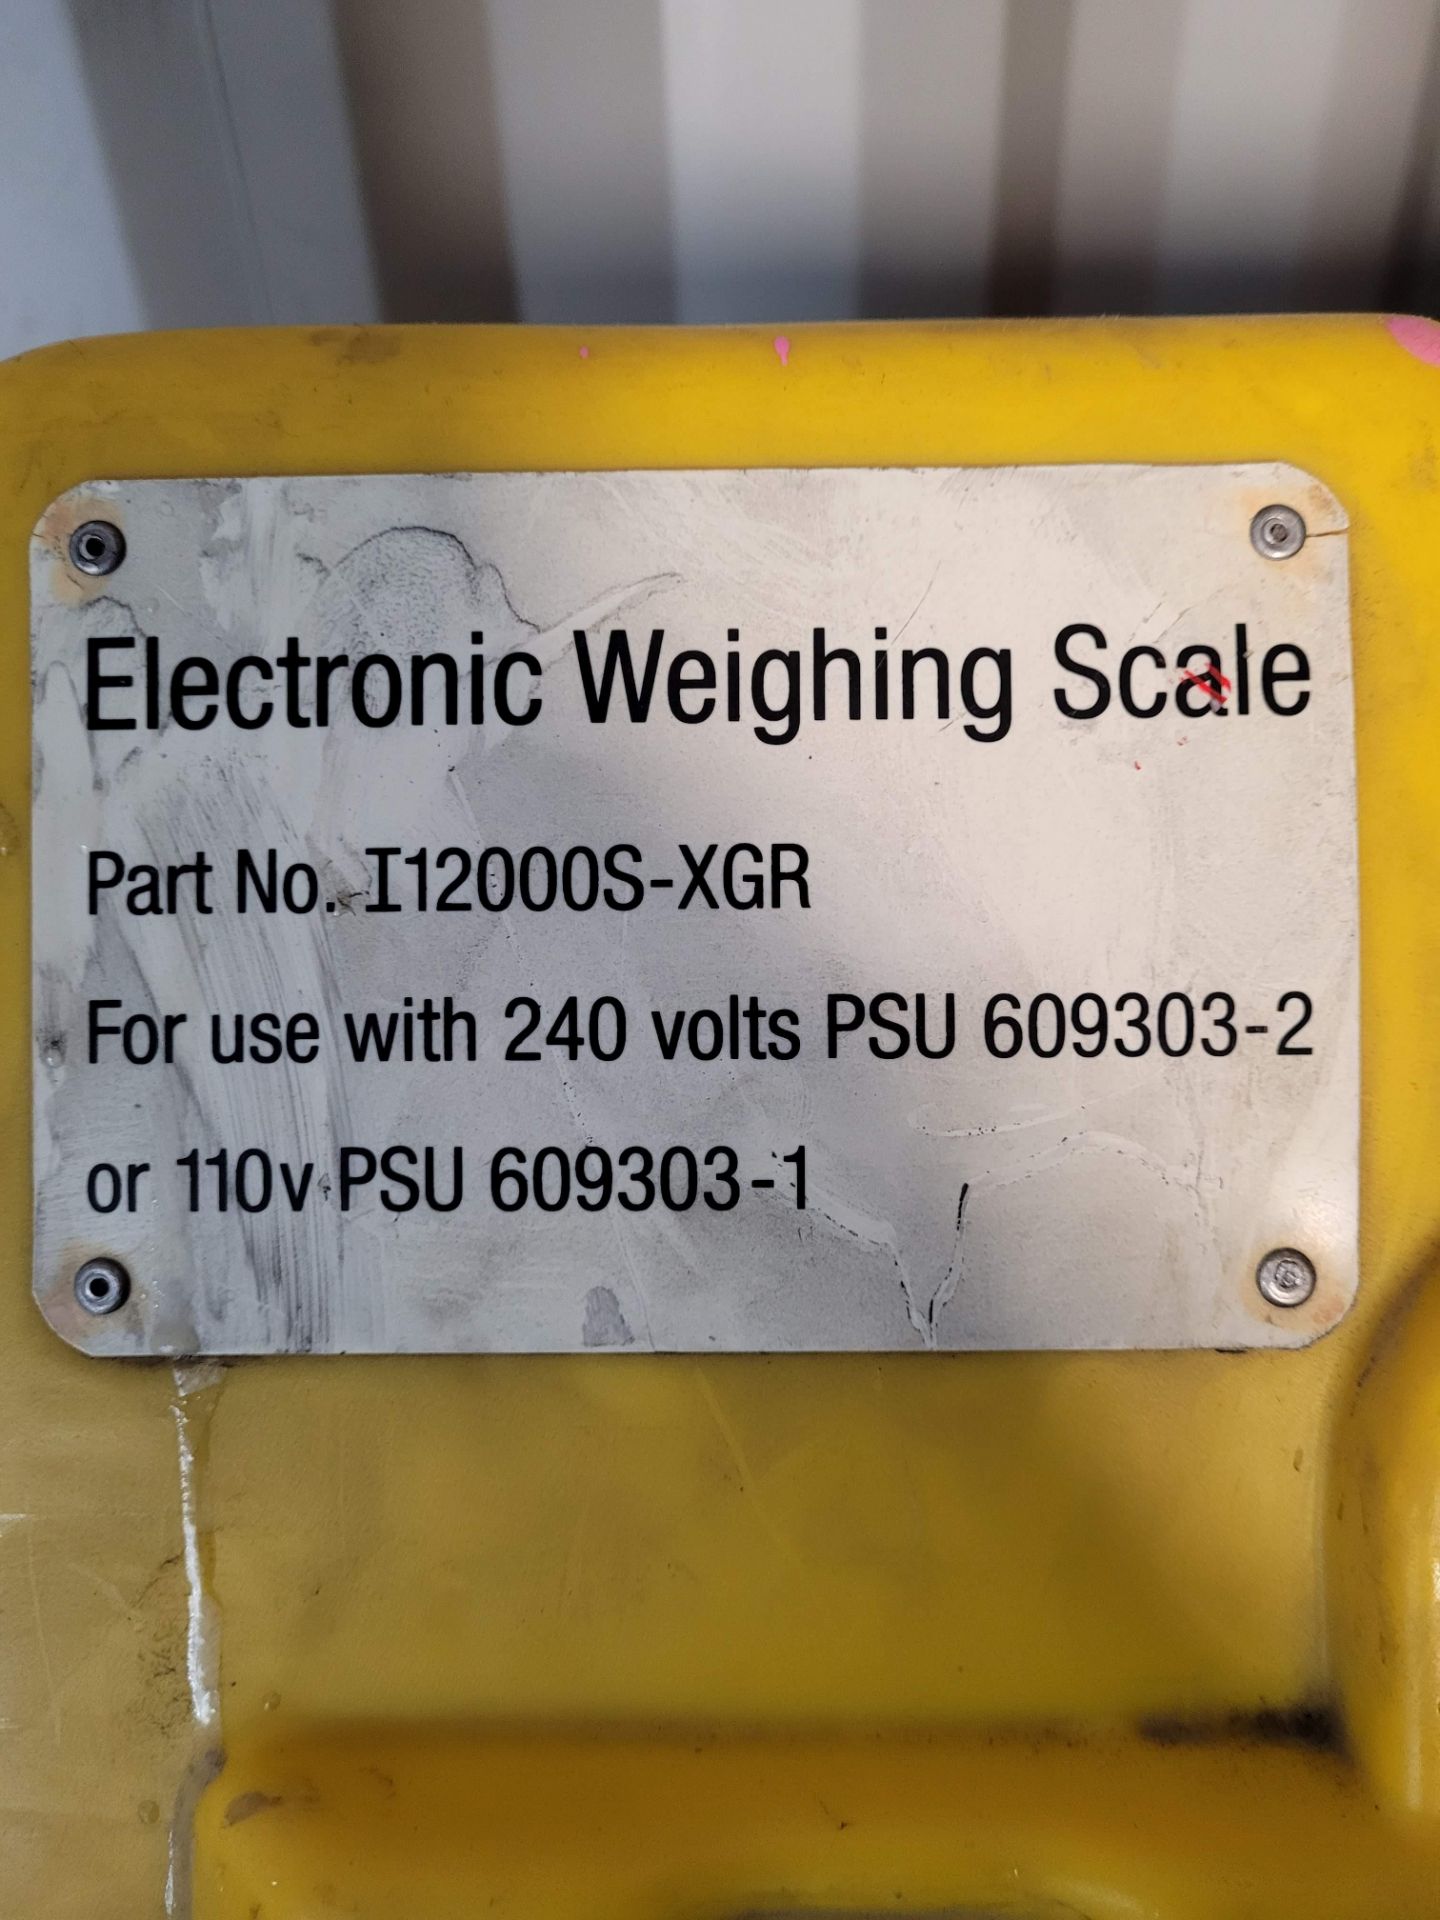 Explosion proof weighing scale, Sartorius - Image 5 of 6